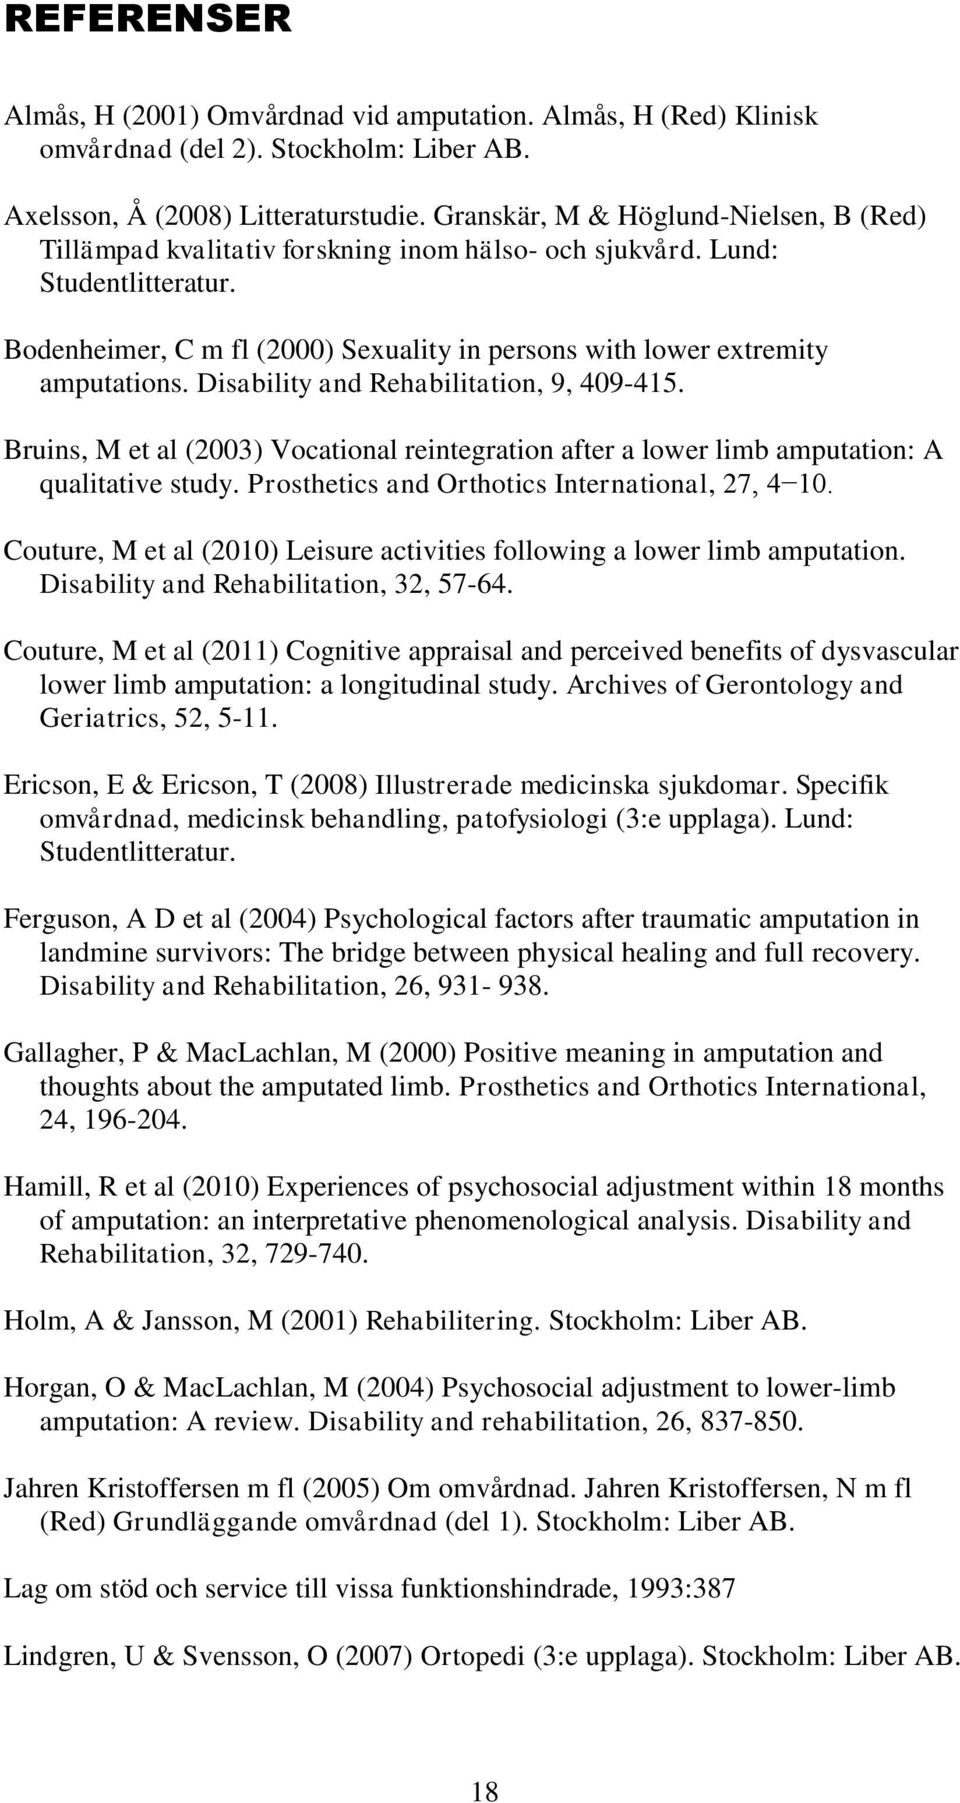 Bodenheimer, C m fl (2000) Sexuality in persons with lower extremity amputations. Disability and Rehabilitation, 9, 409-415.